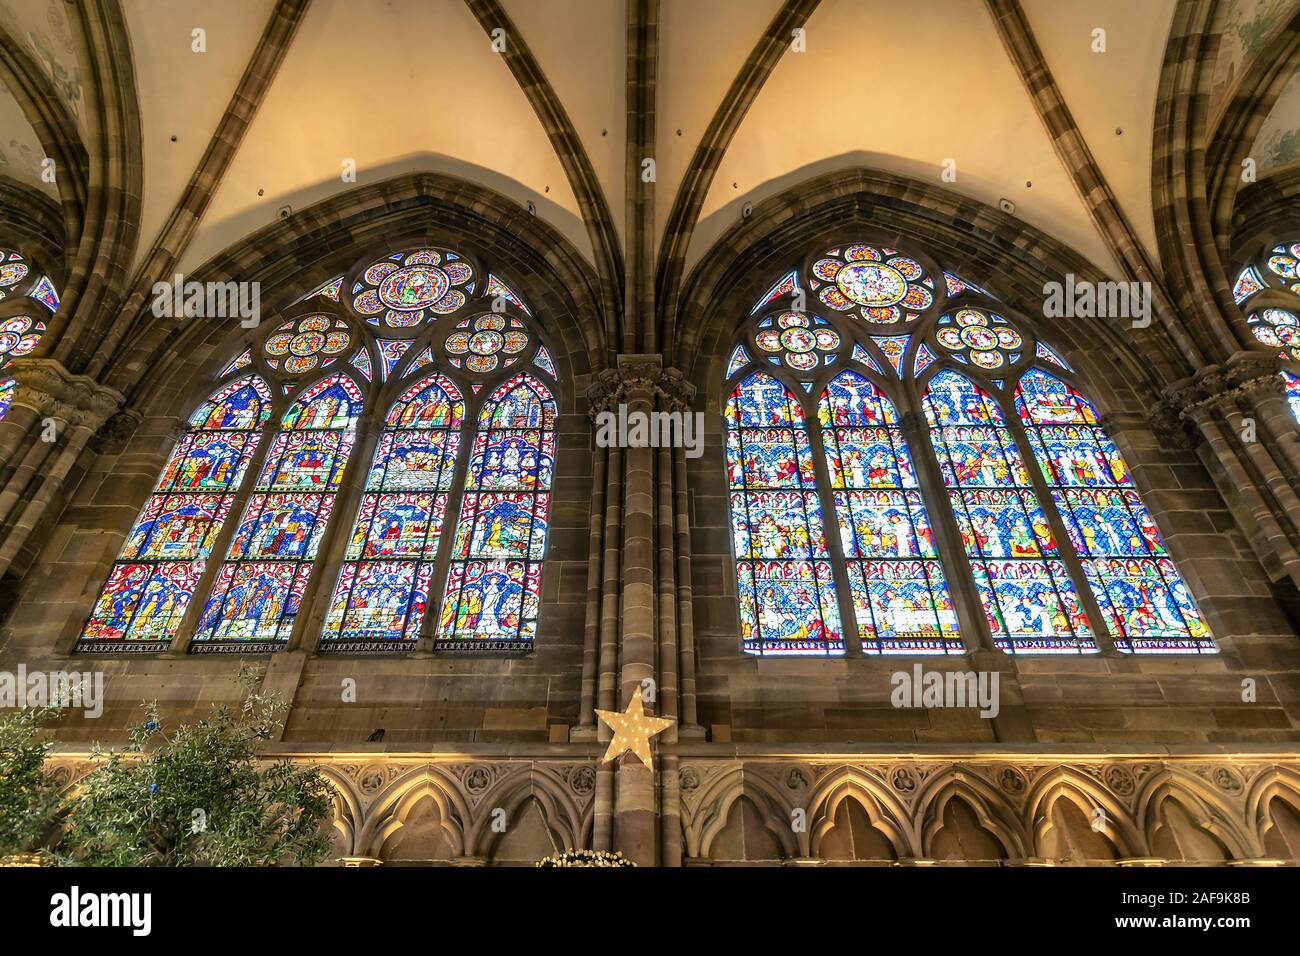 Strasbourg, France - december 1,2019: Stained glass windows inside of Strasbourg Cathedral or the Cathedral of Our Lady of Strasbourg, also known as S Stock Photo